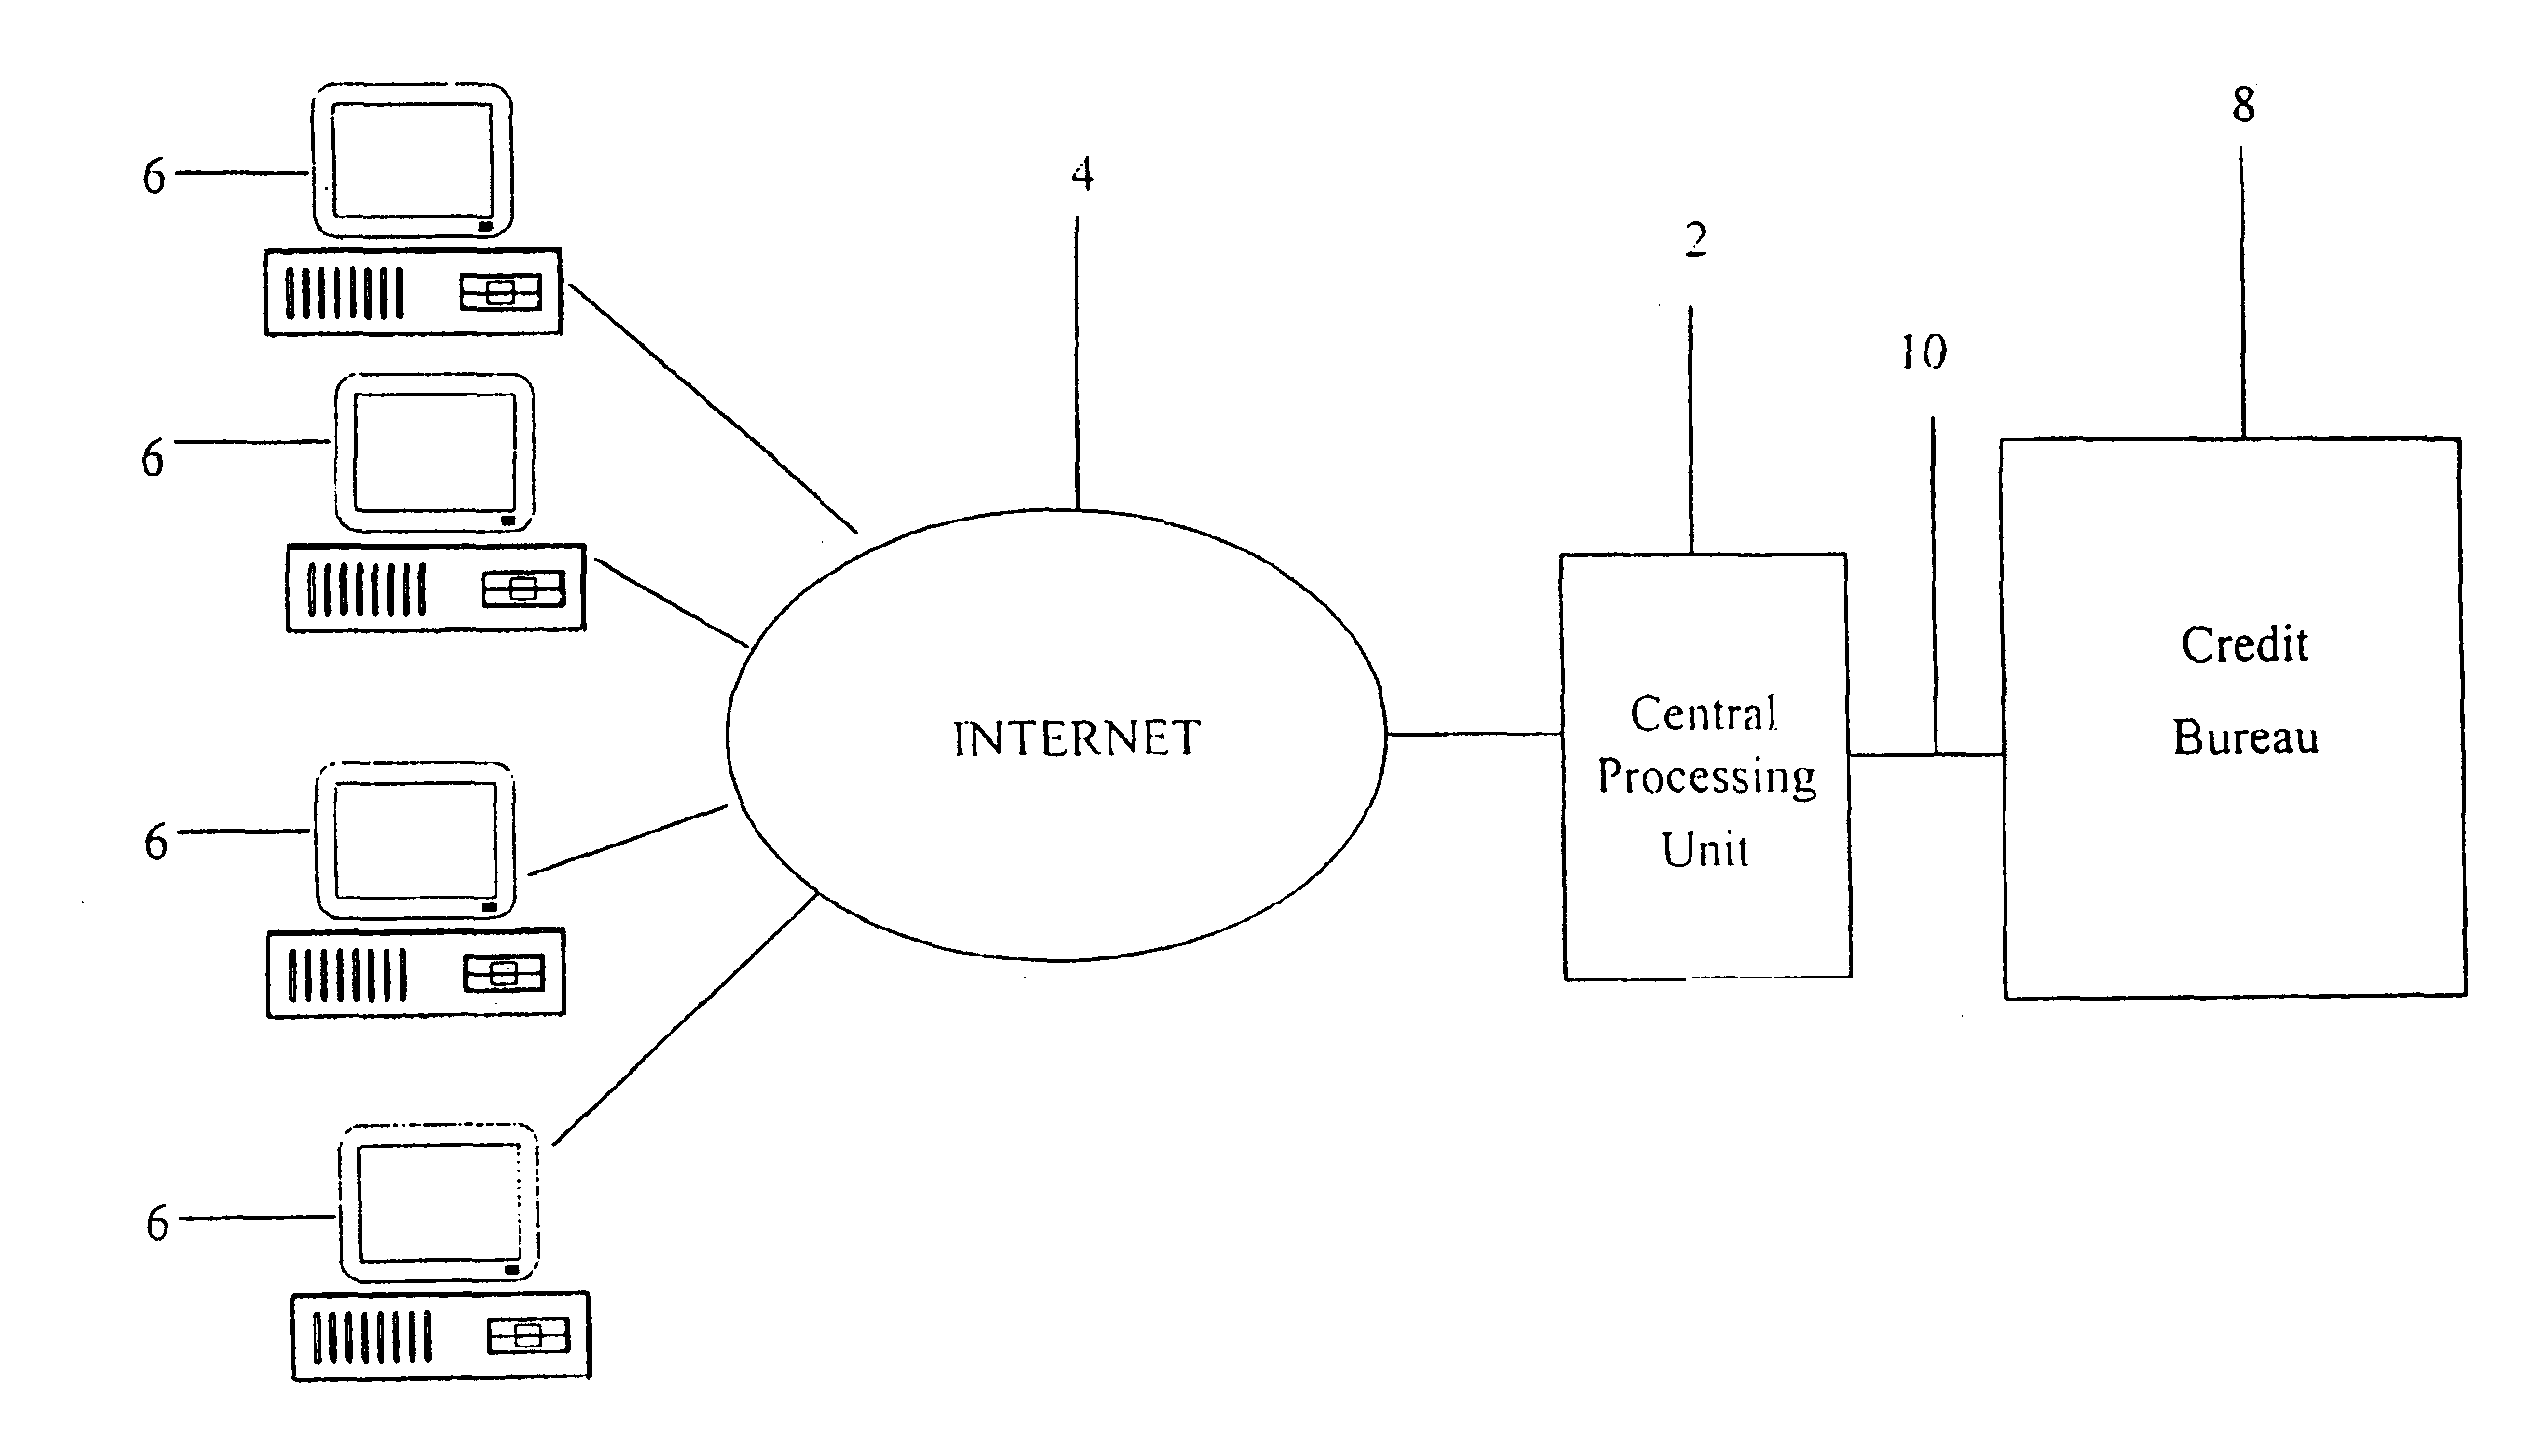 System and method for real-time electronic inquiry, delivery, and reporting of credit information